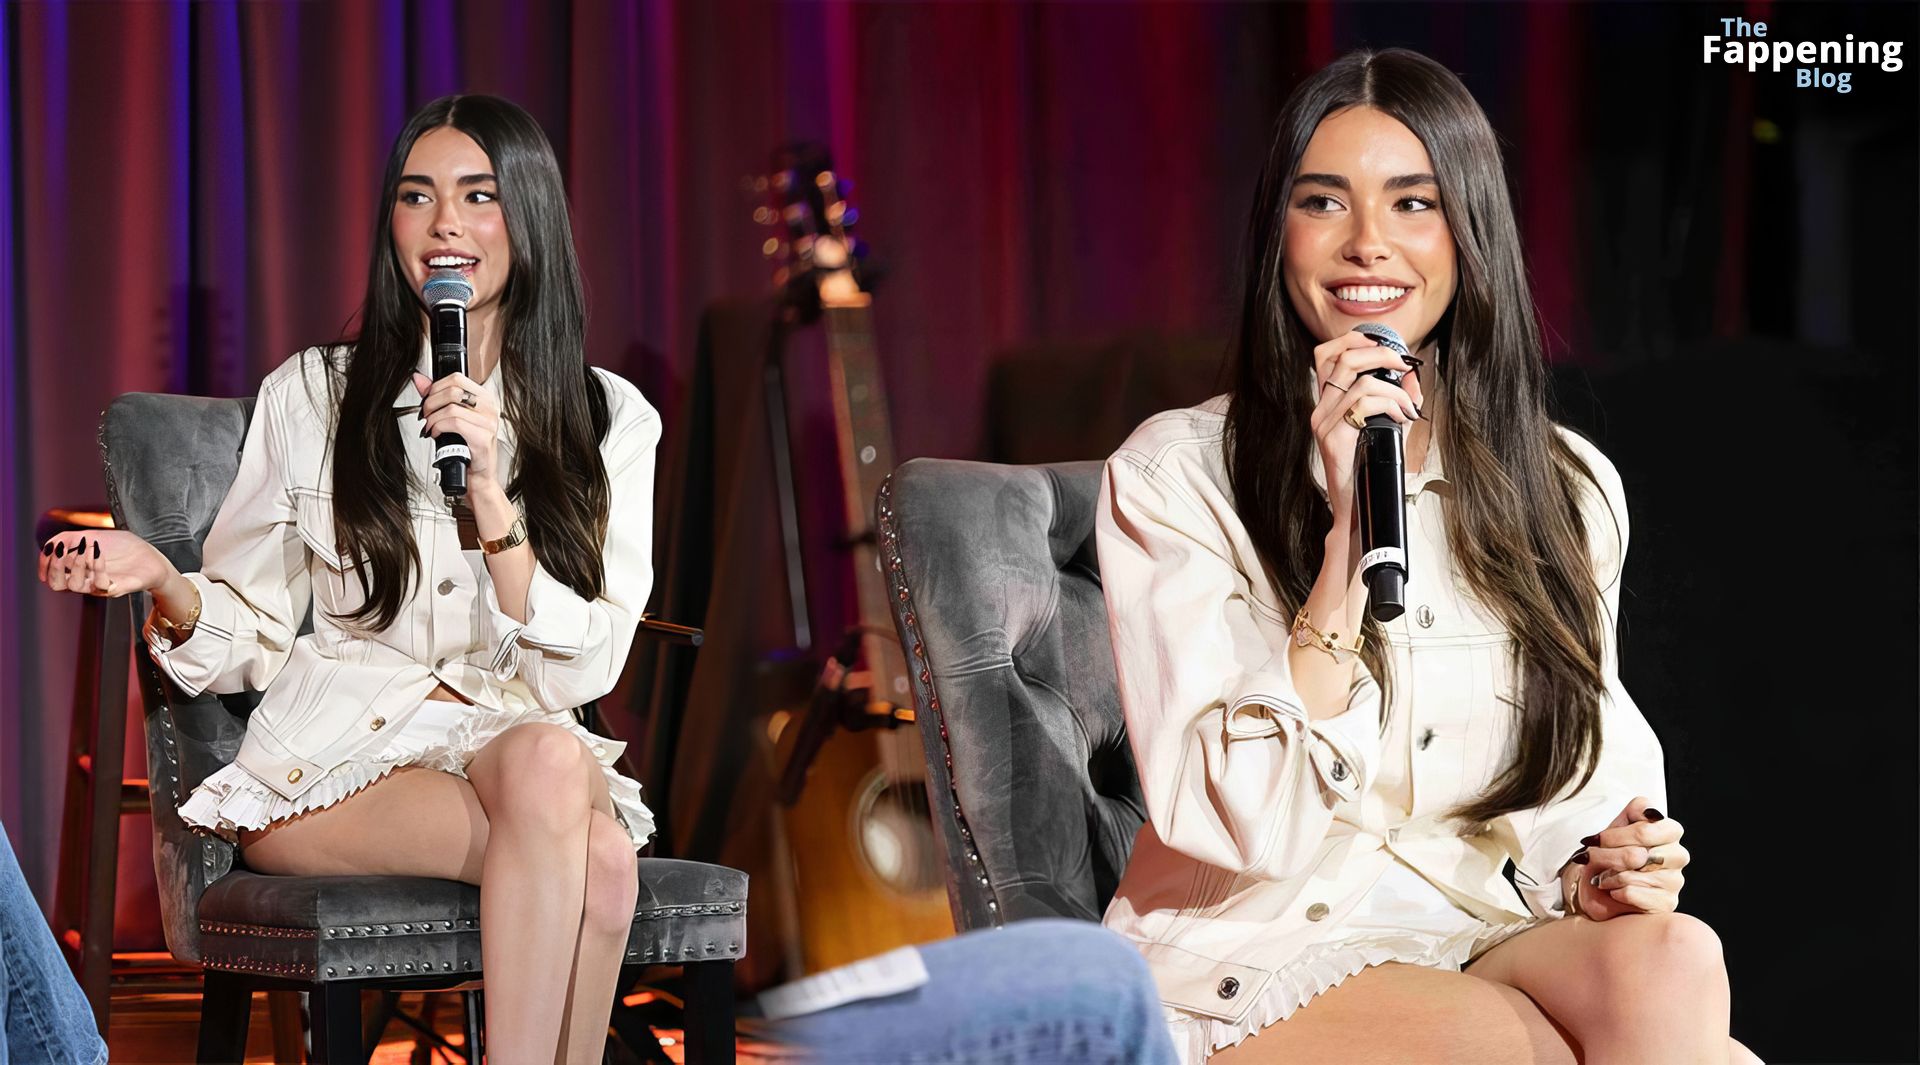 Madison Beer Displays Her Sexy Legs in a Mini Skirt (40 Photos)